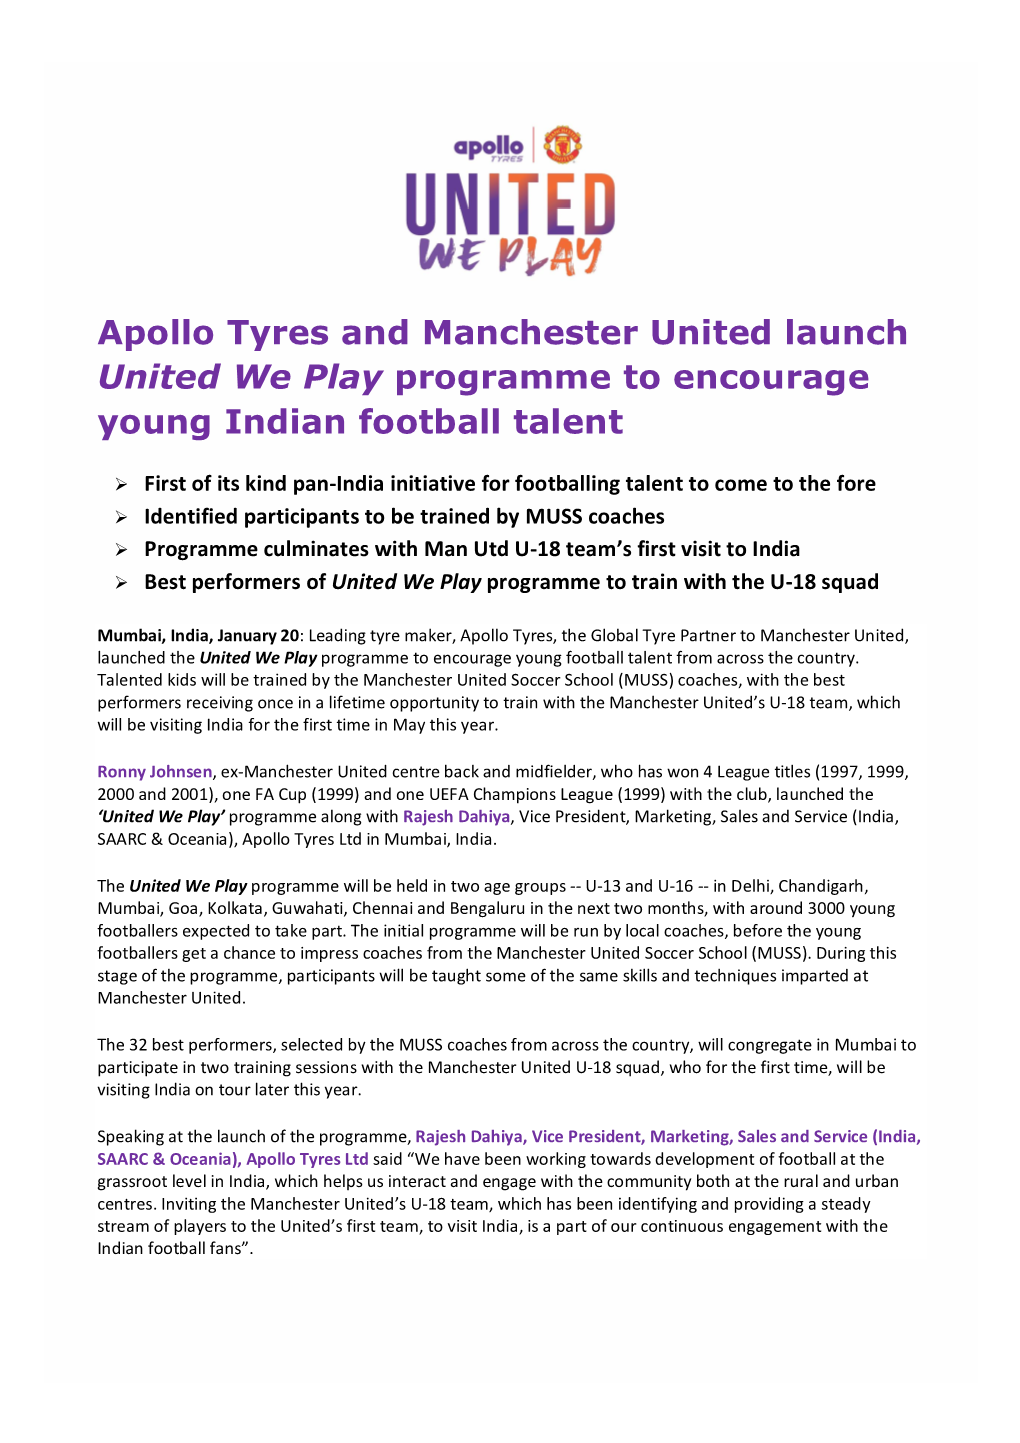 Apollo Tyres and Manchester United Launch United We Play Programme to Encourage Young Indian Football Talent